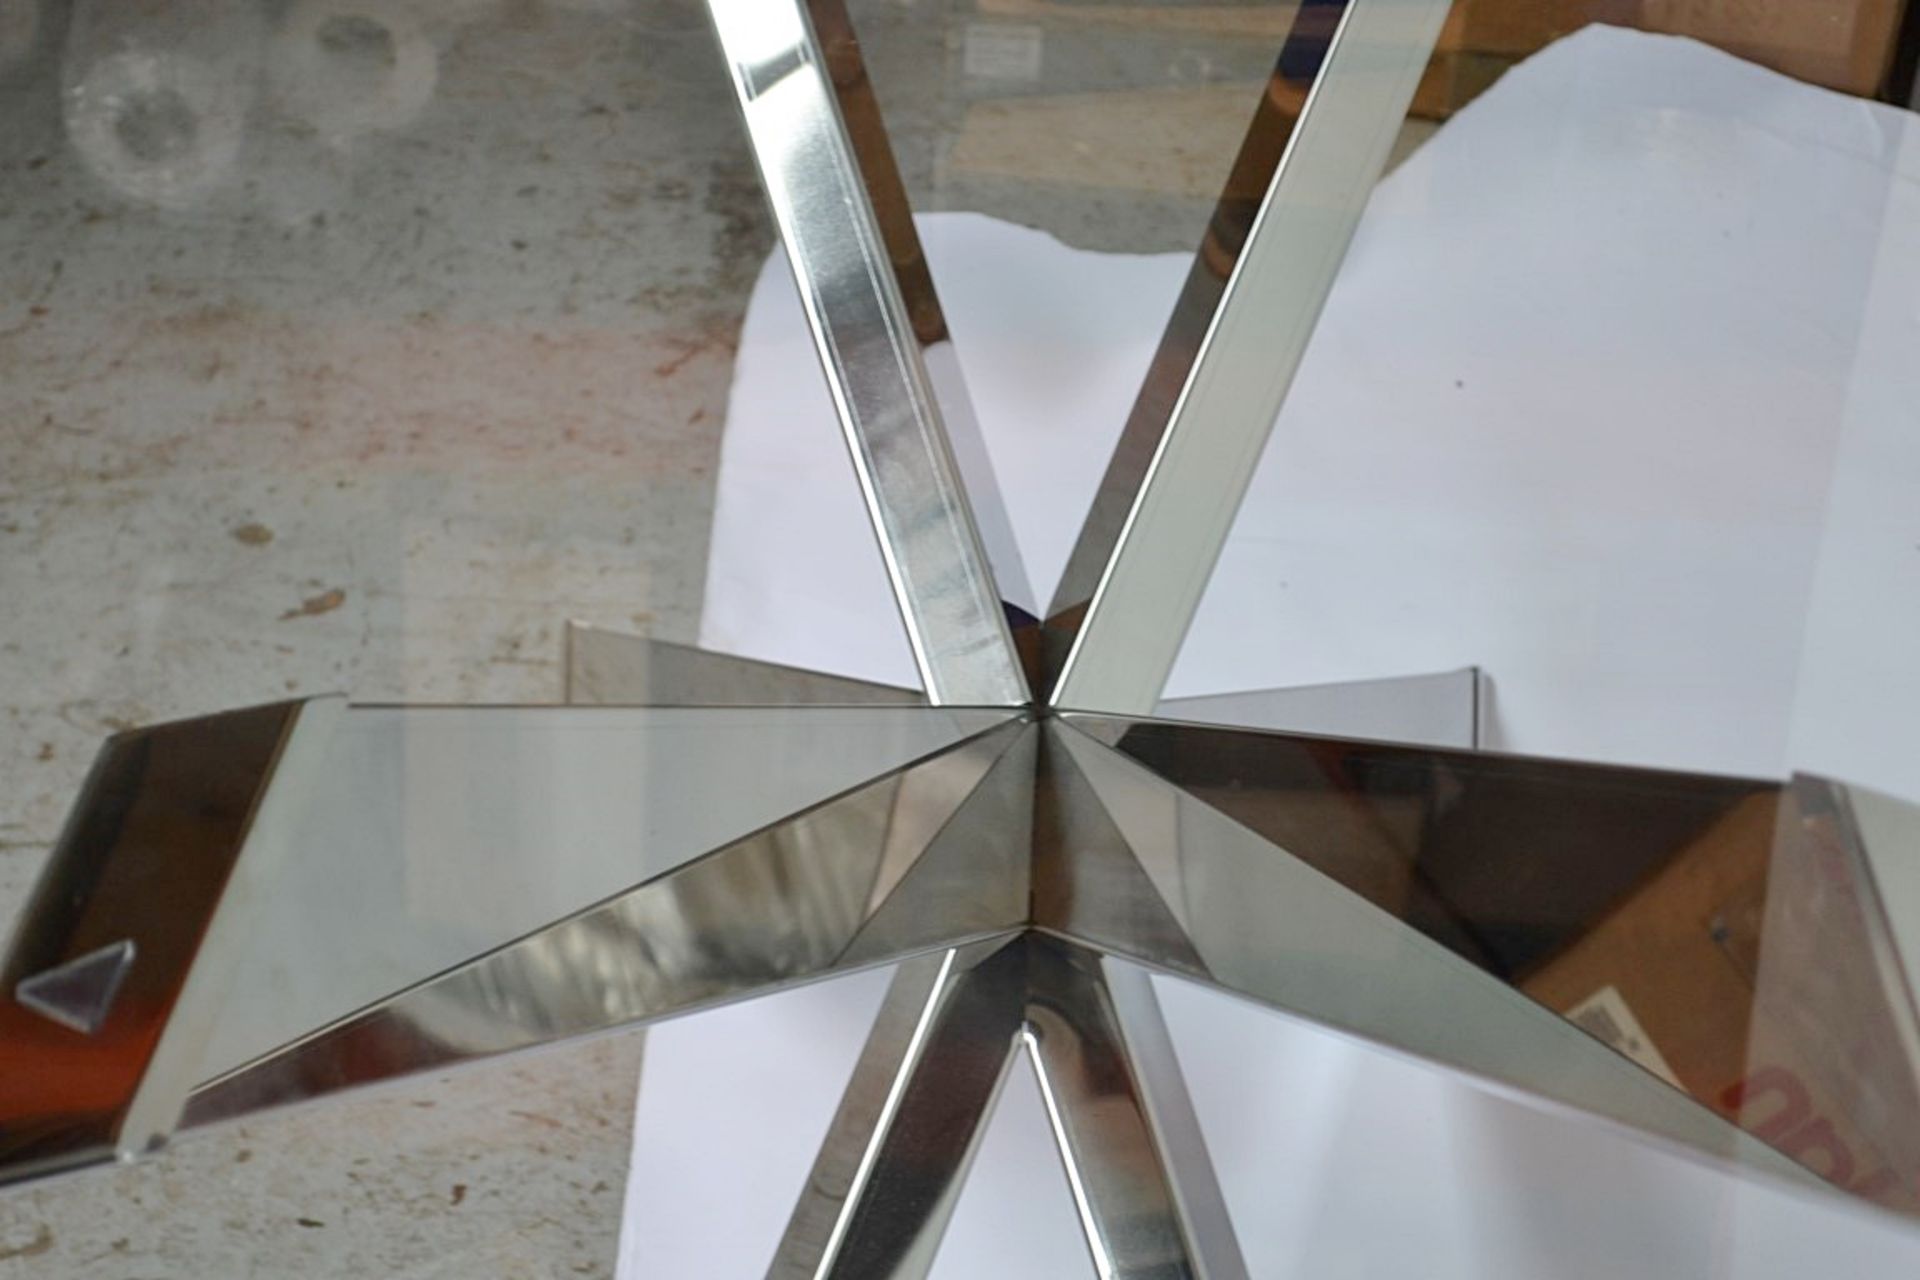 1 x CATTELAN "Spyder" Glass Topped Table - Stunning Piece In Great Condition - Dimensions: - Image 5 of 6